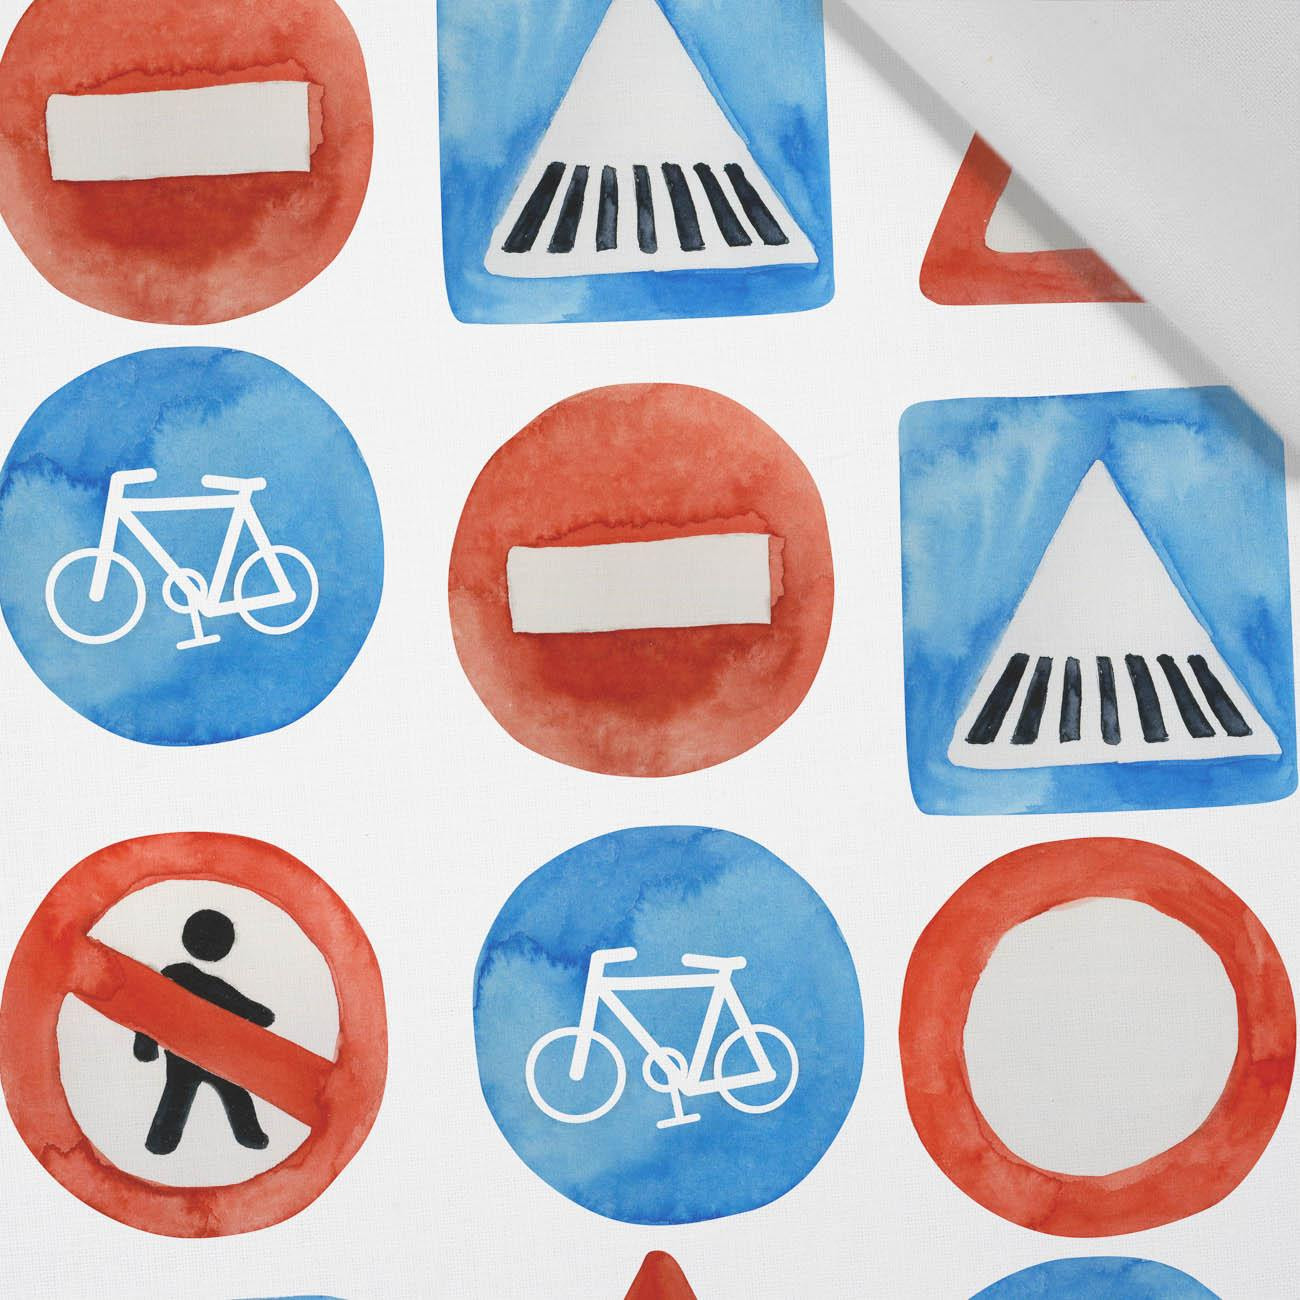 ROAD SIGNS (COLORFUL TRANSPORT) - Cotton woven fabric